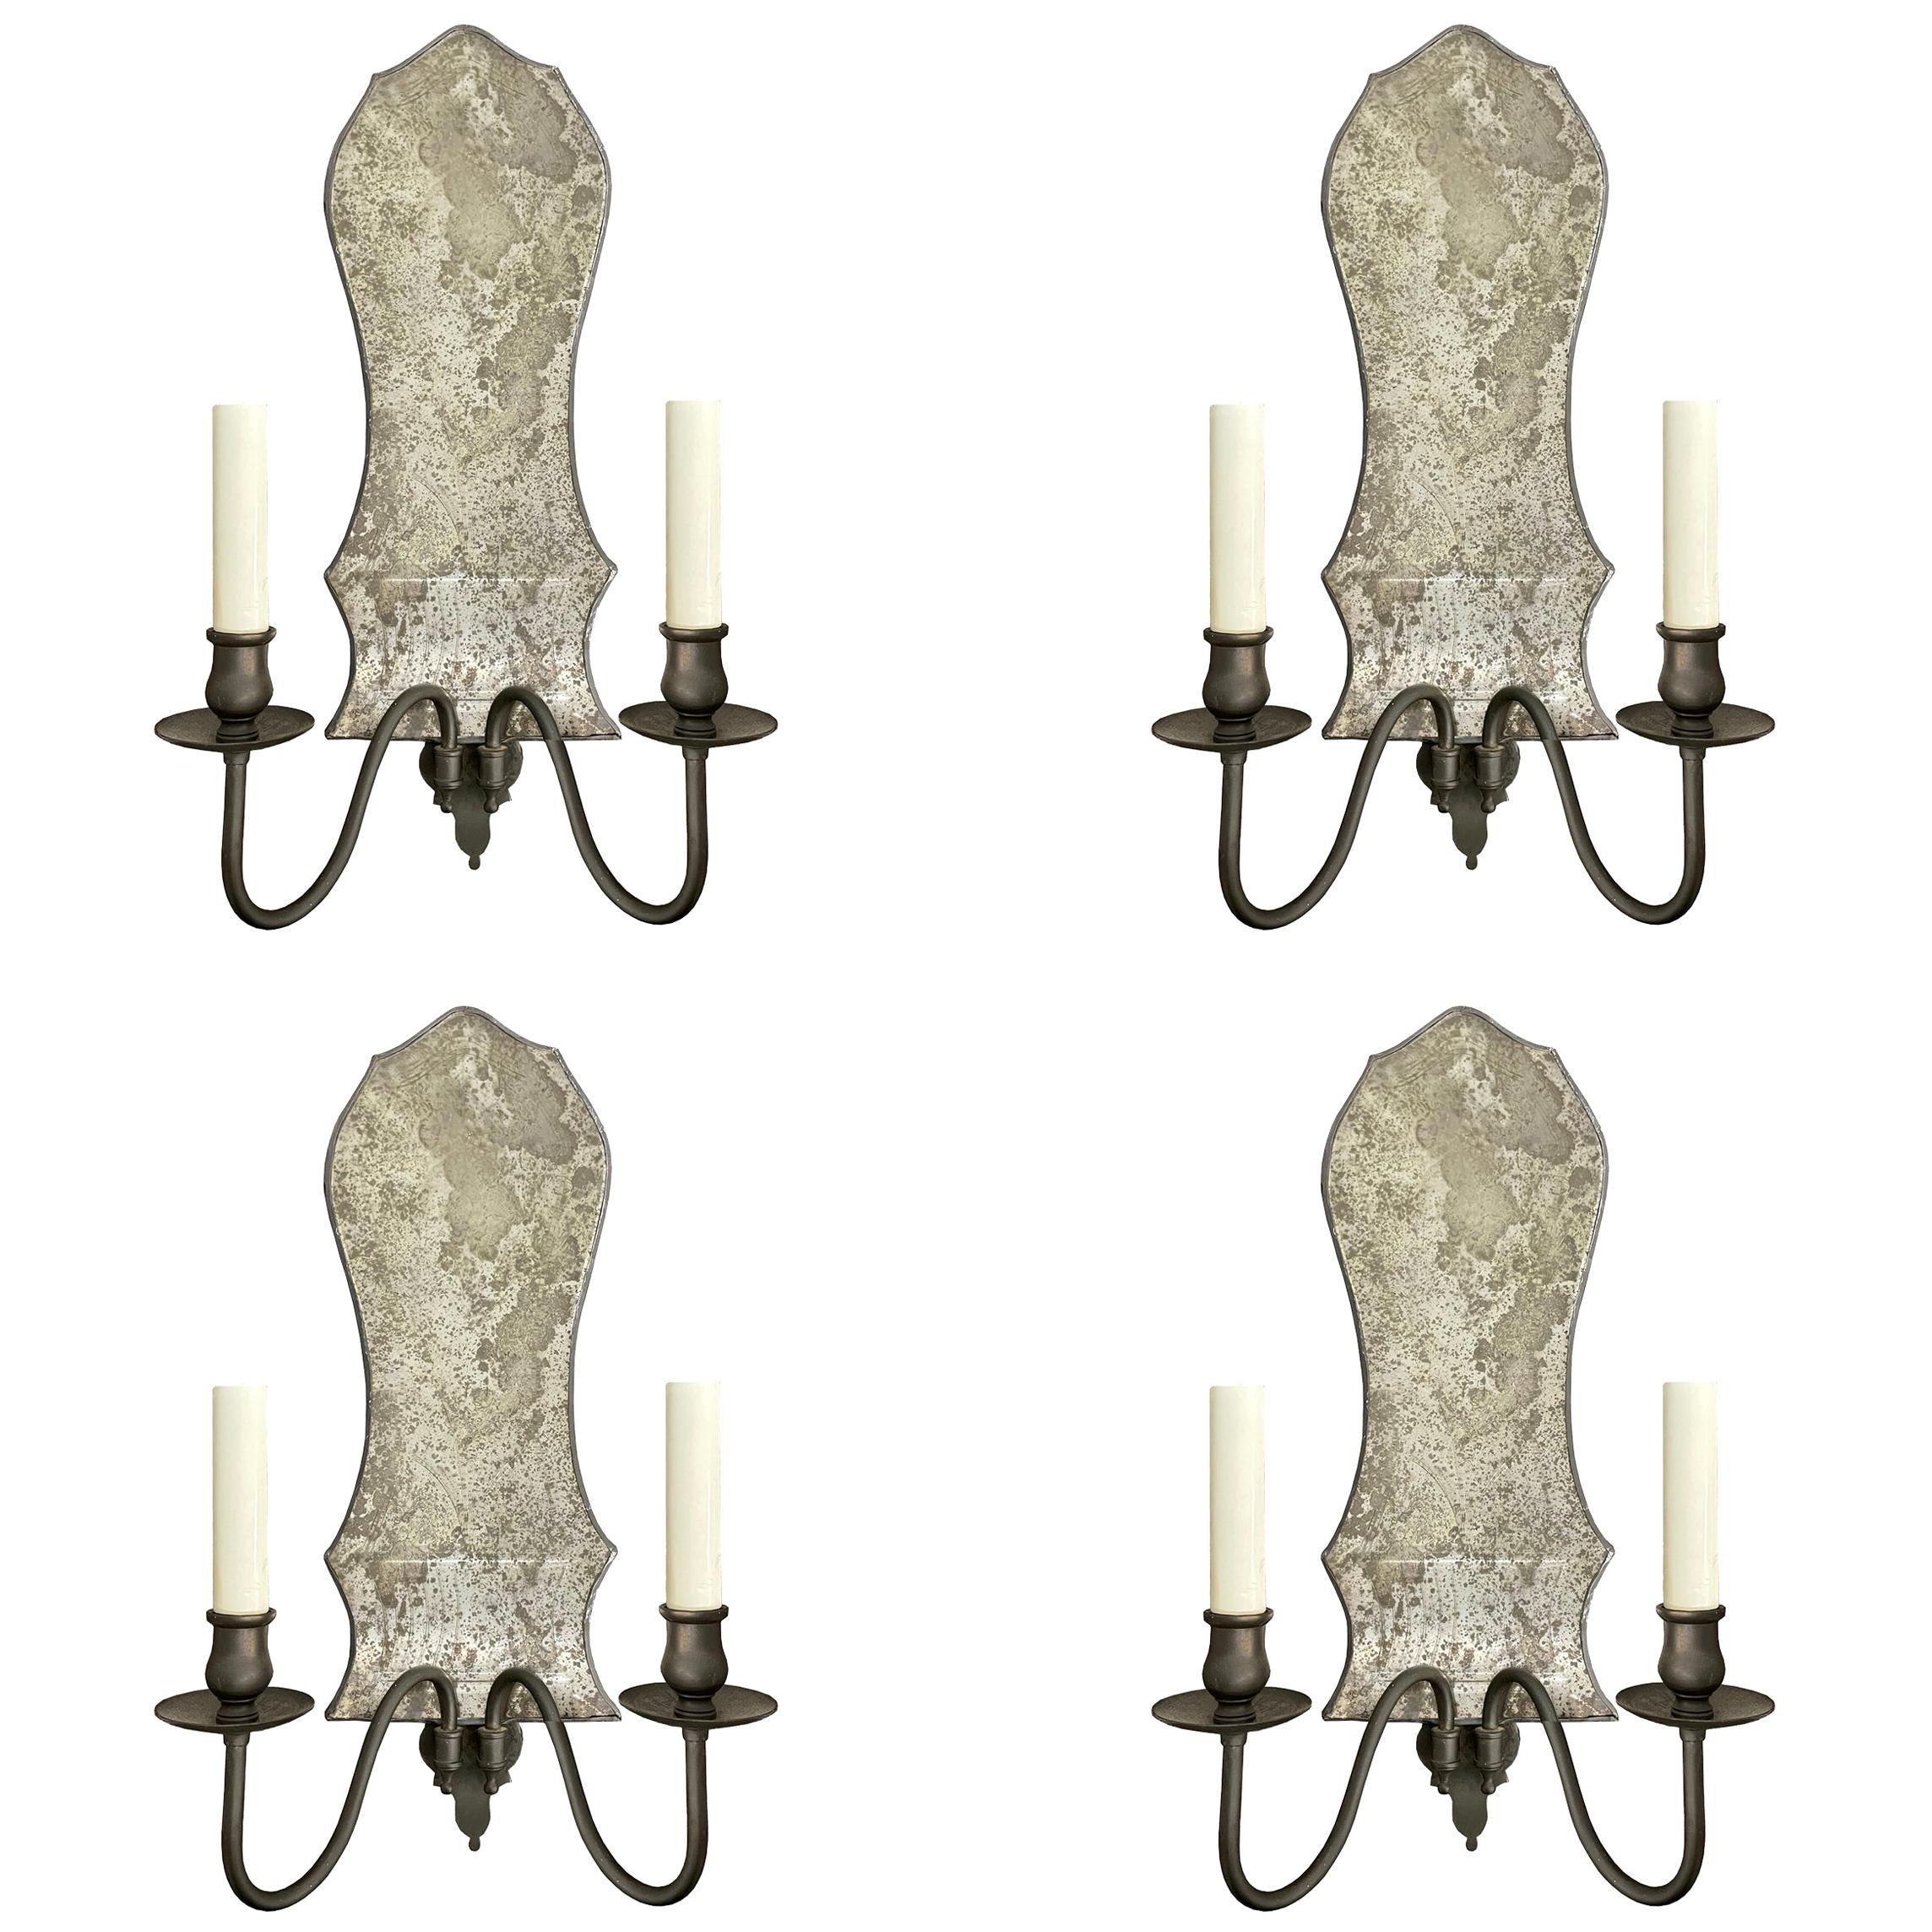 Set of Four Mid-20th Century American Two-Arm Sconces